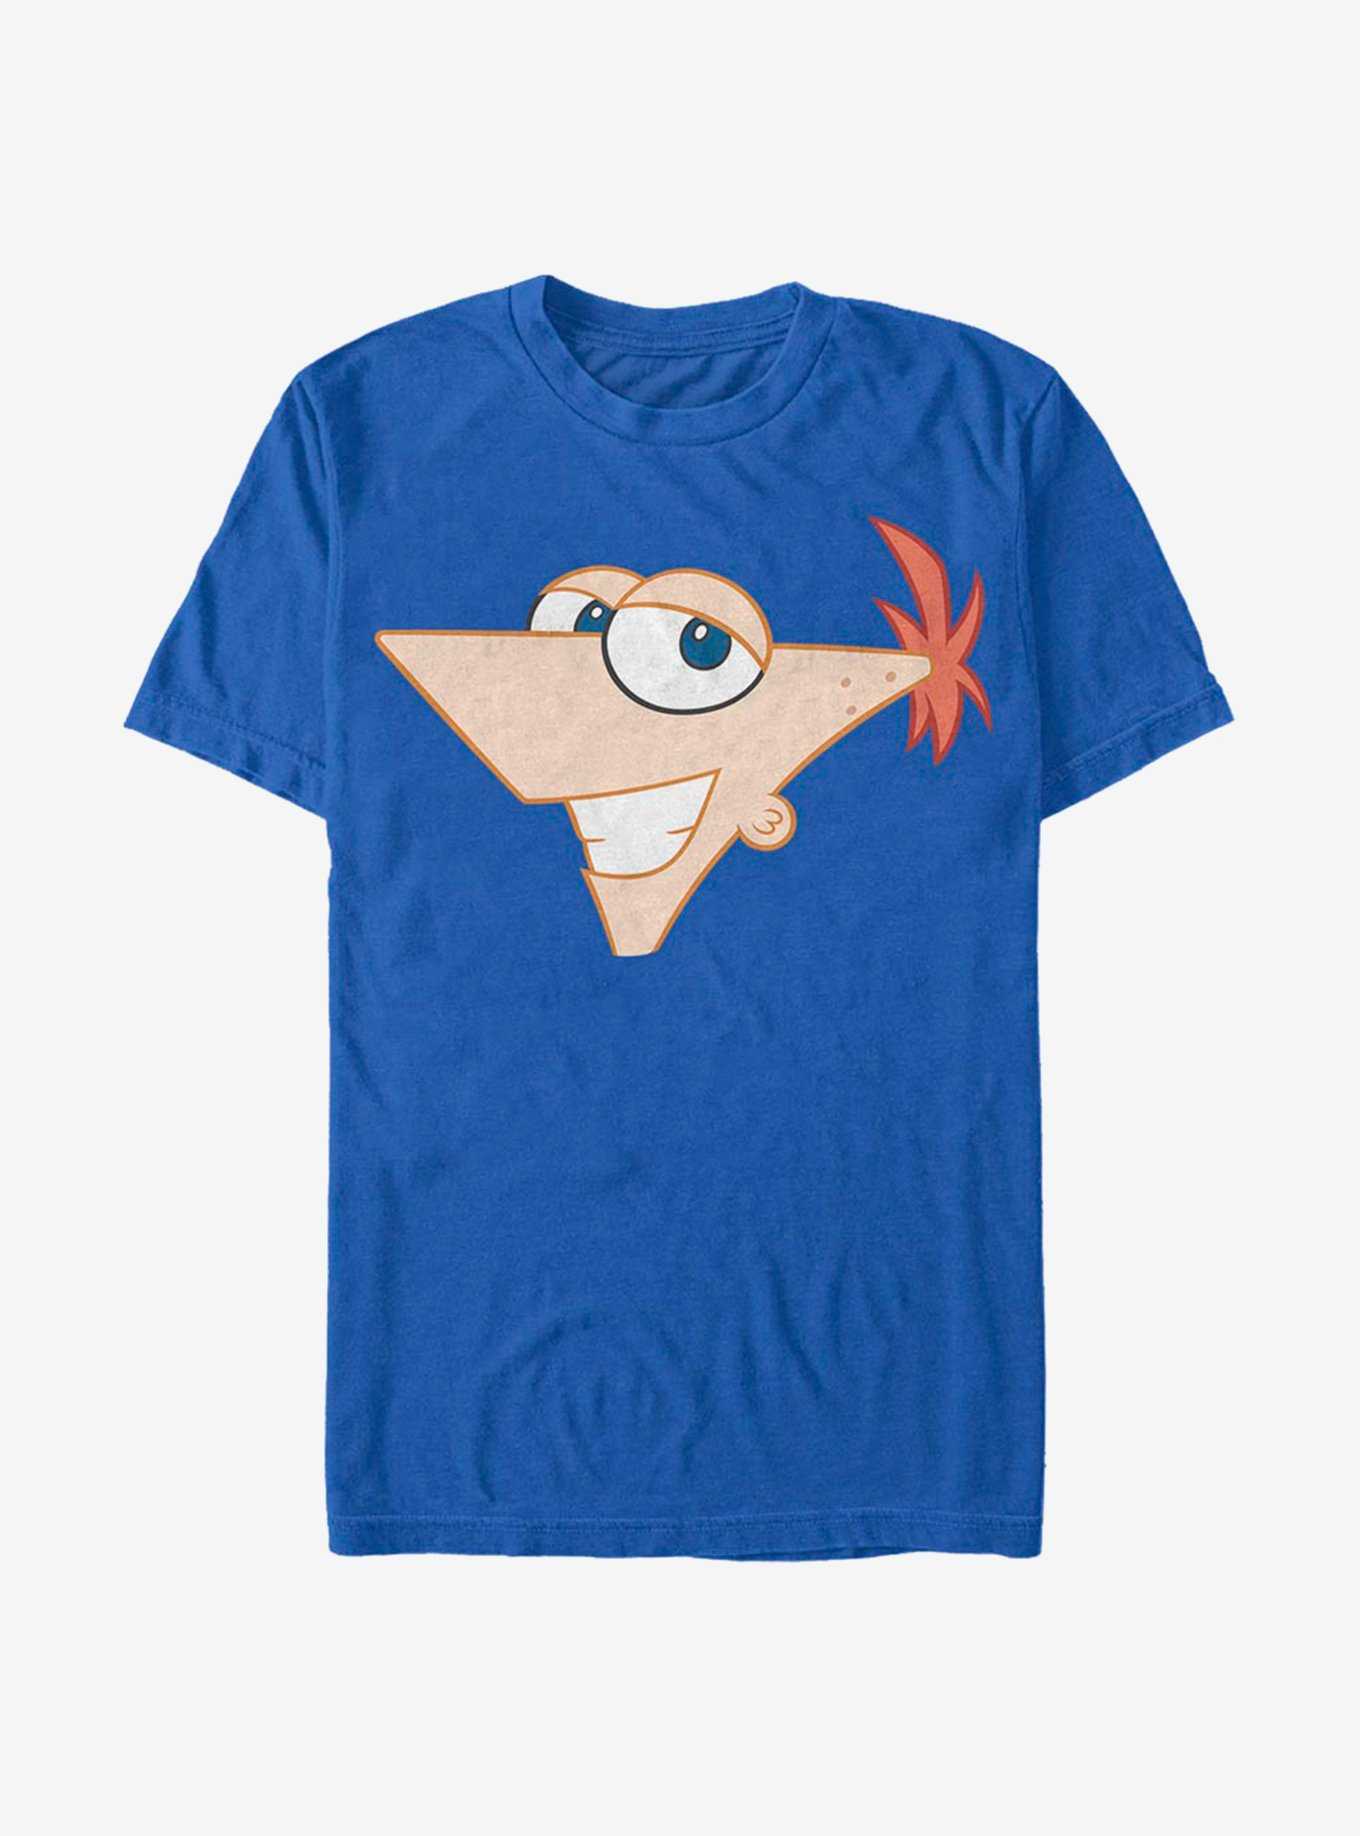 Disney Phineas And Ferb Large Phineas T-Shirt, , hi-res